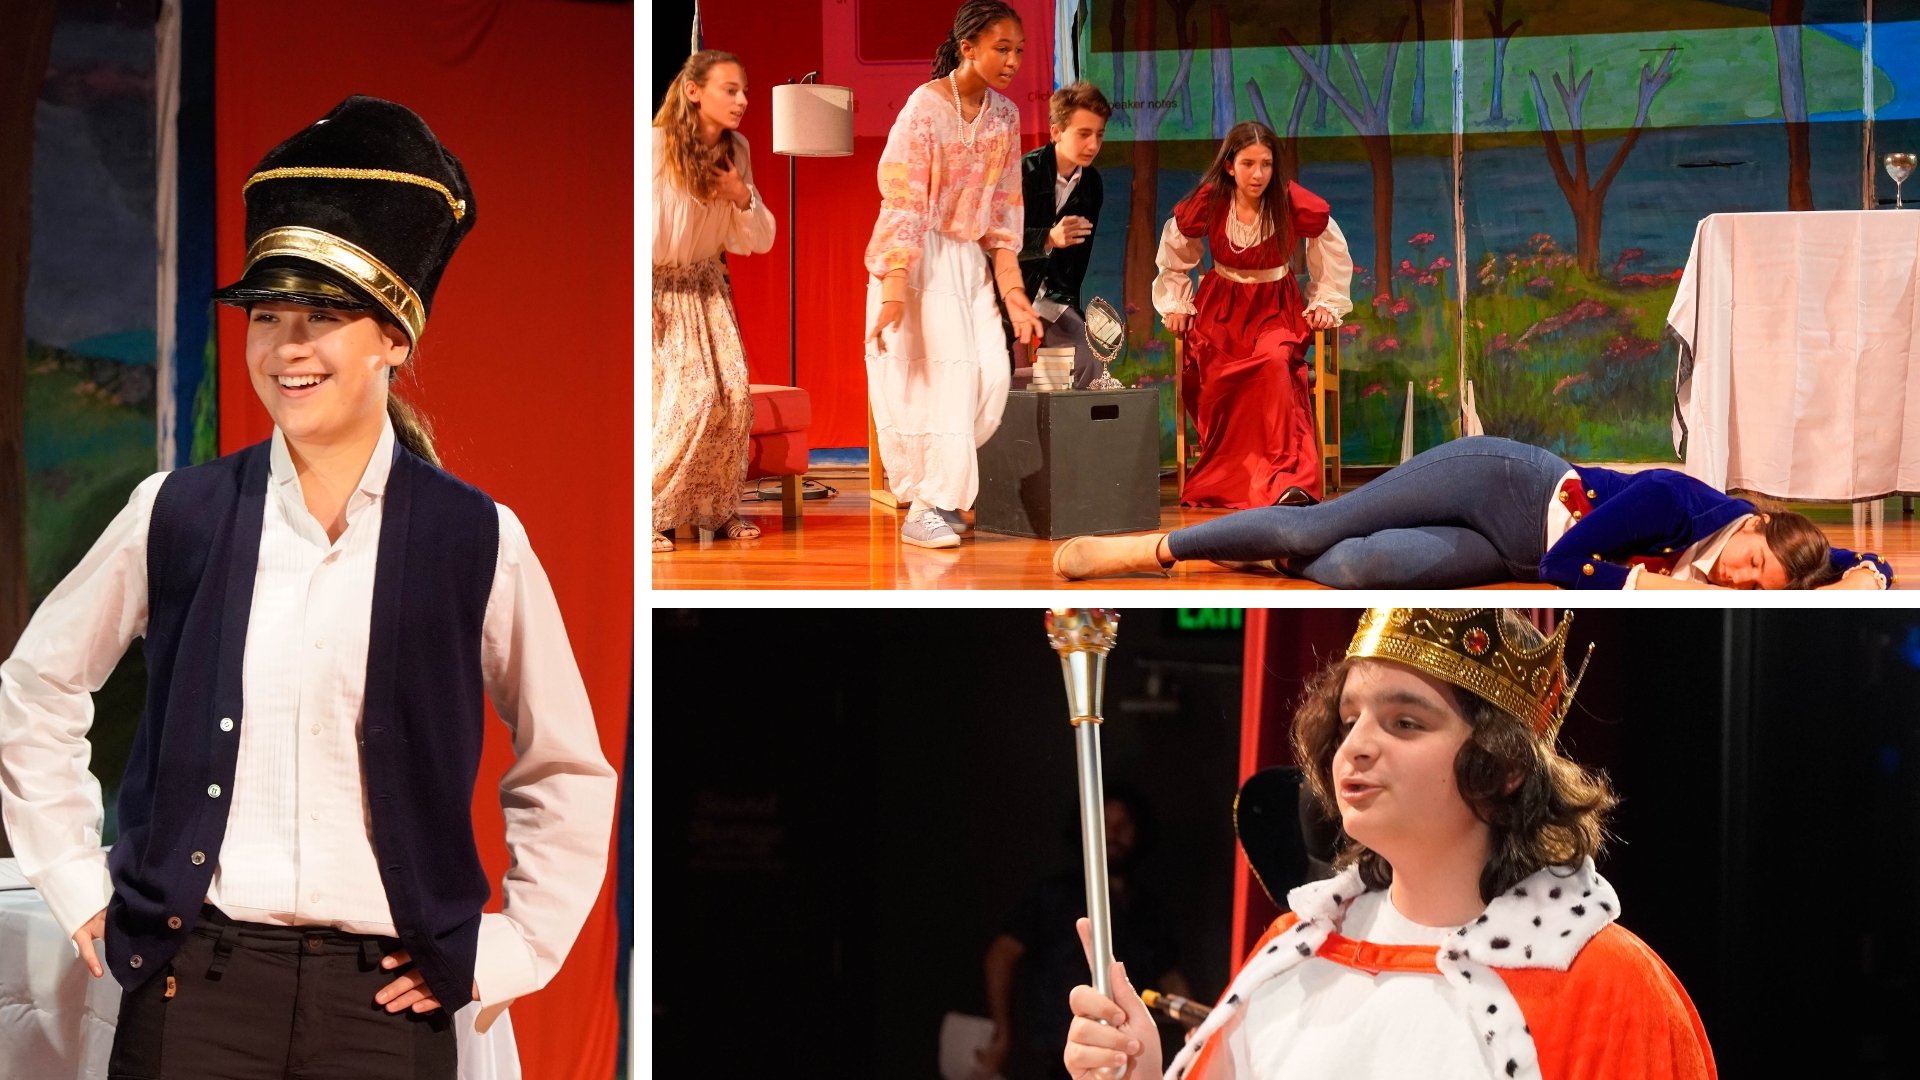 Three photos from the French performance (left the policewoman, top right the ensemble, bottom right the king)